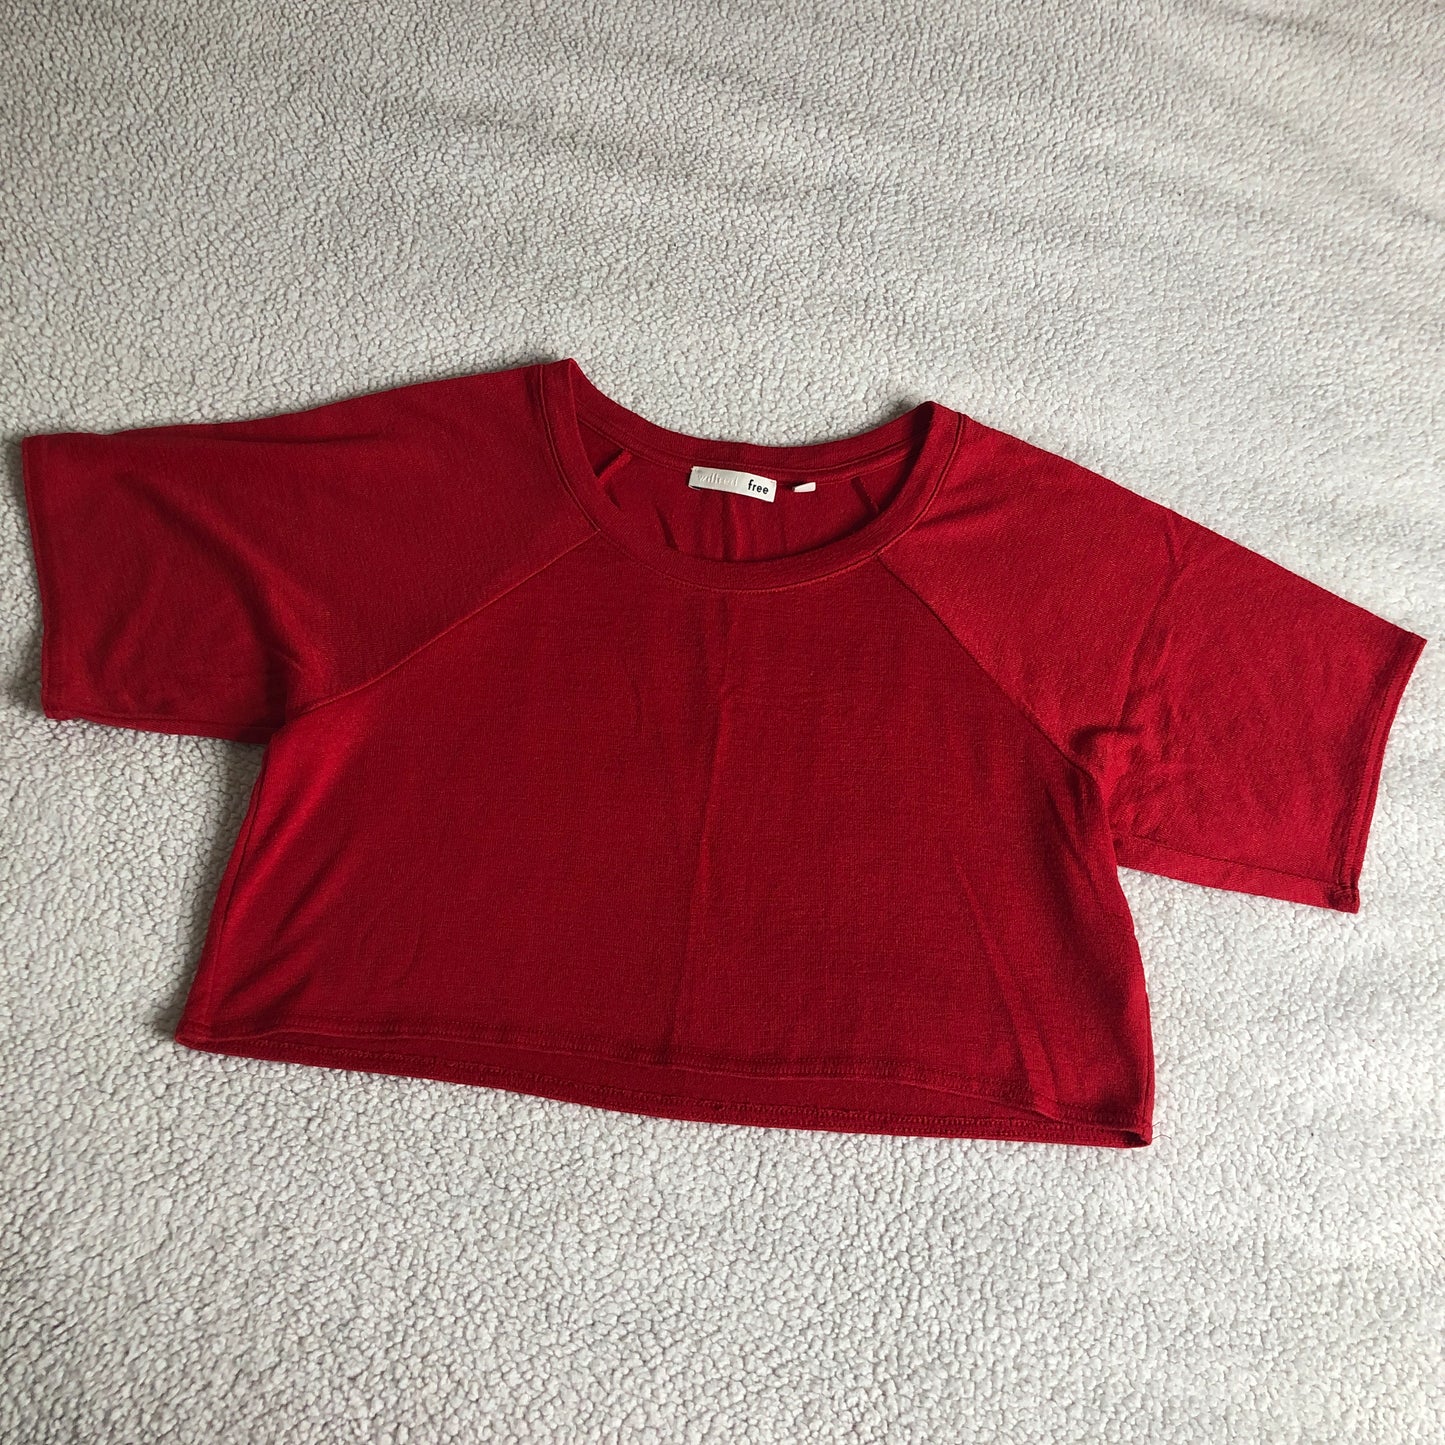 Wilfred Free red super cropped short sleeve shirt